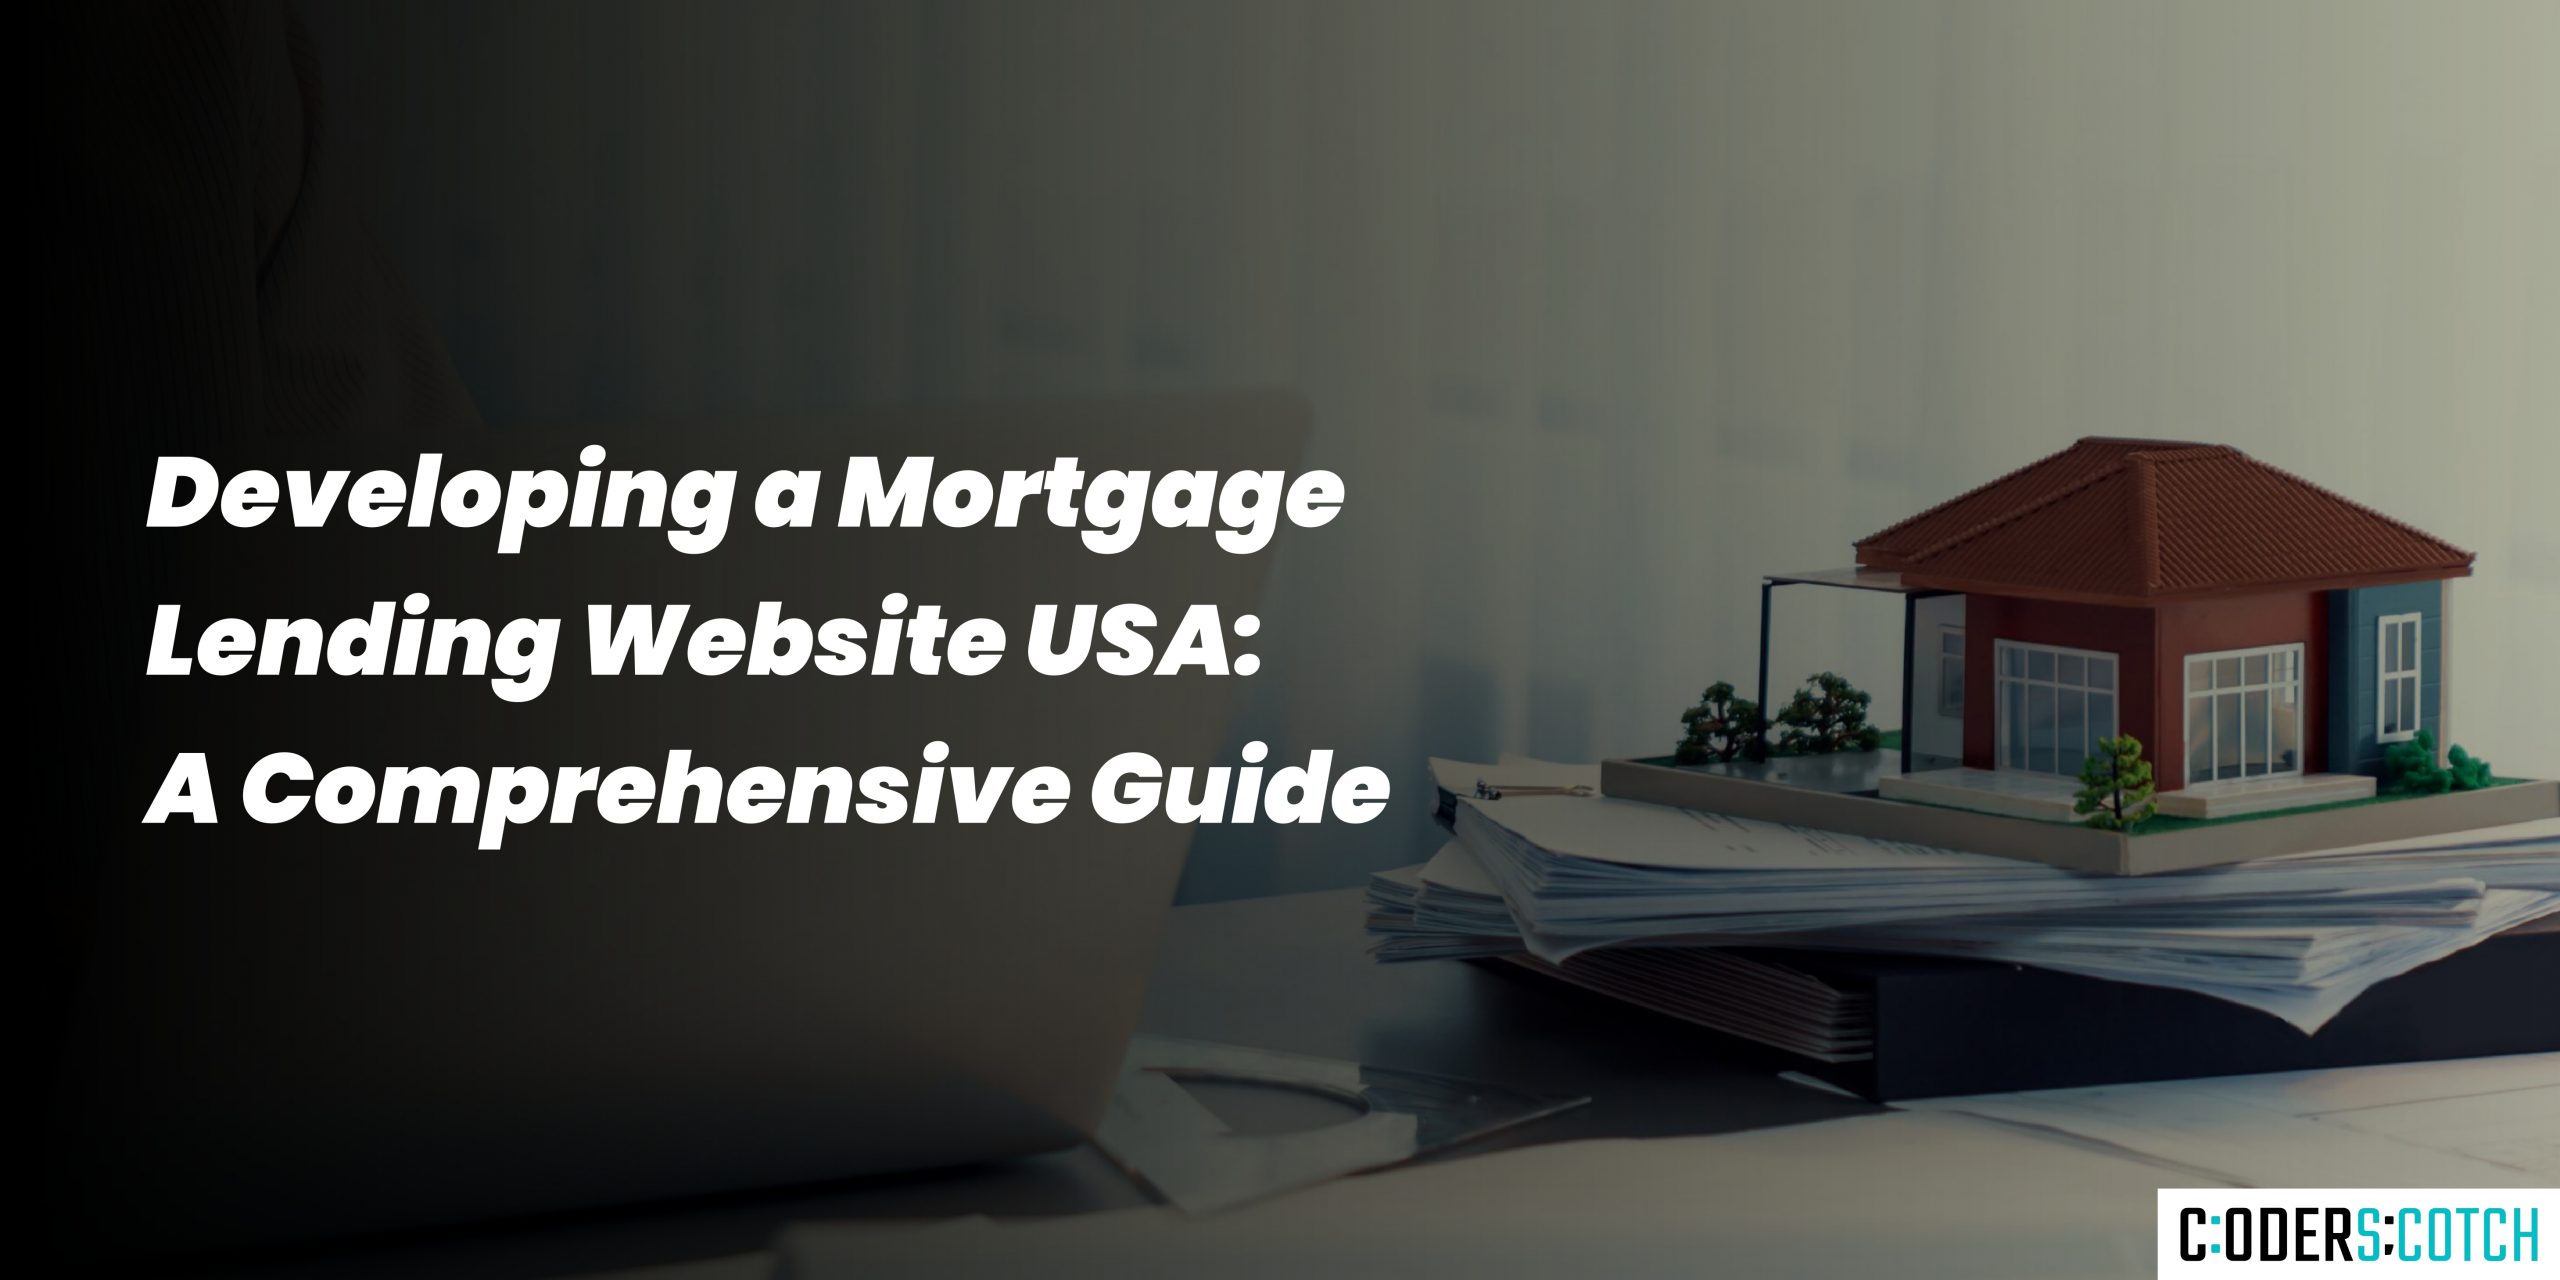 Developing a Mortgage Lending Website USA: A Comprehensive Guide